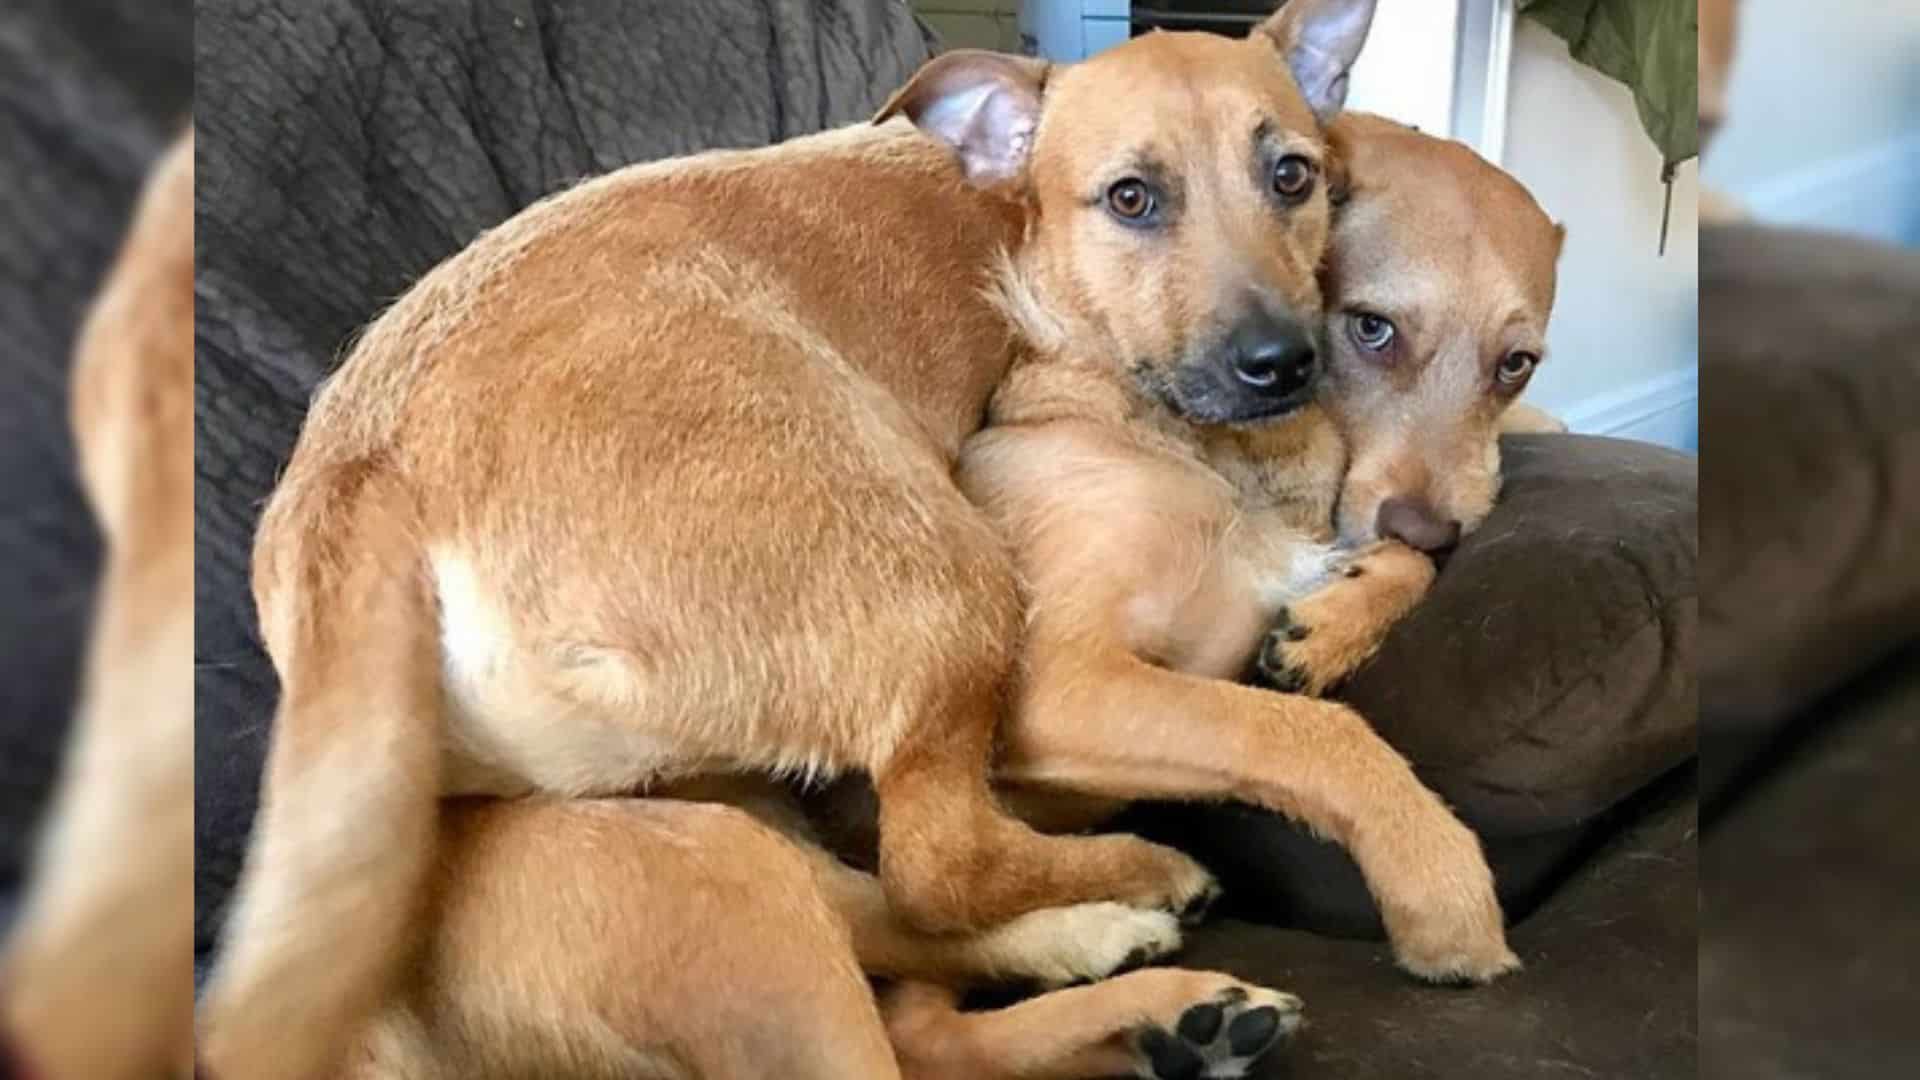 Dog Bumps Into His Twin By Accident And Refuses To Leave His Side